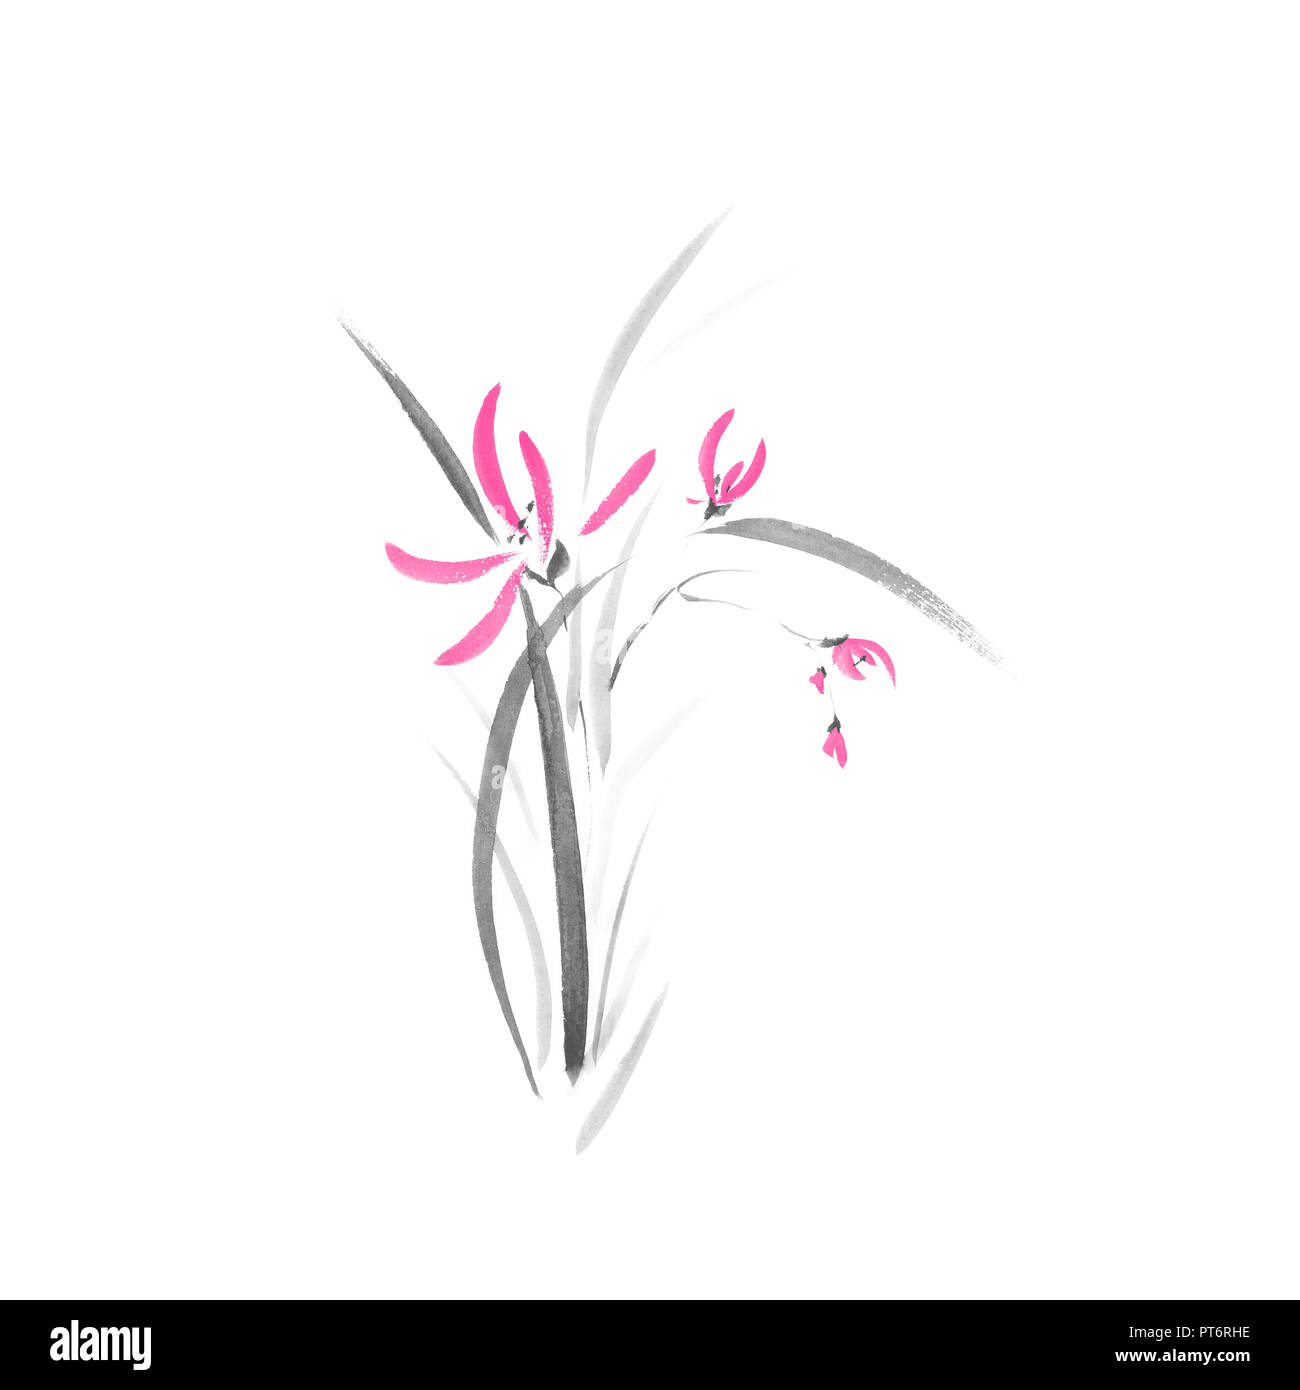 Pink Wild Orchid Flowers Delicate Japanese Sumi E Zen Style Illustration Black And Color Ink Painted Artwork Isolated On White Background Stock Photo Alamy